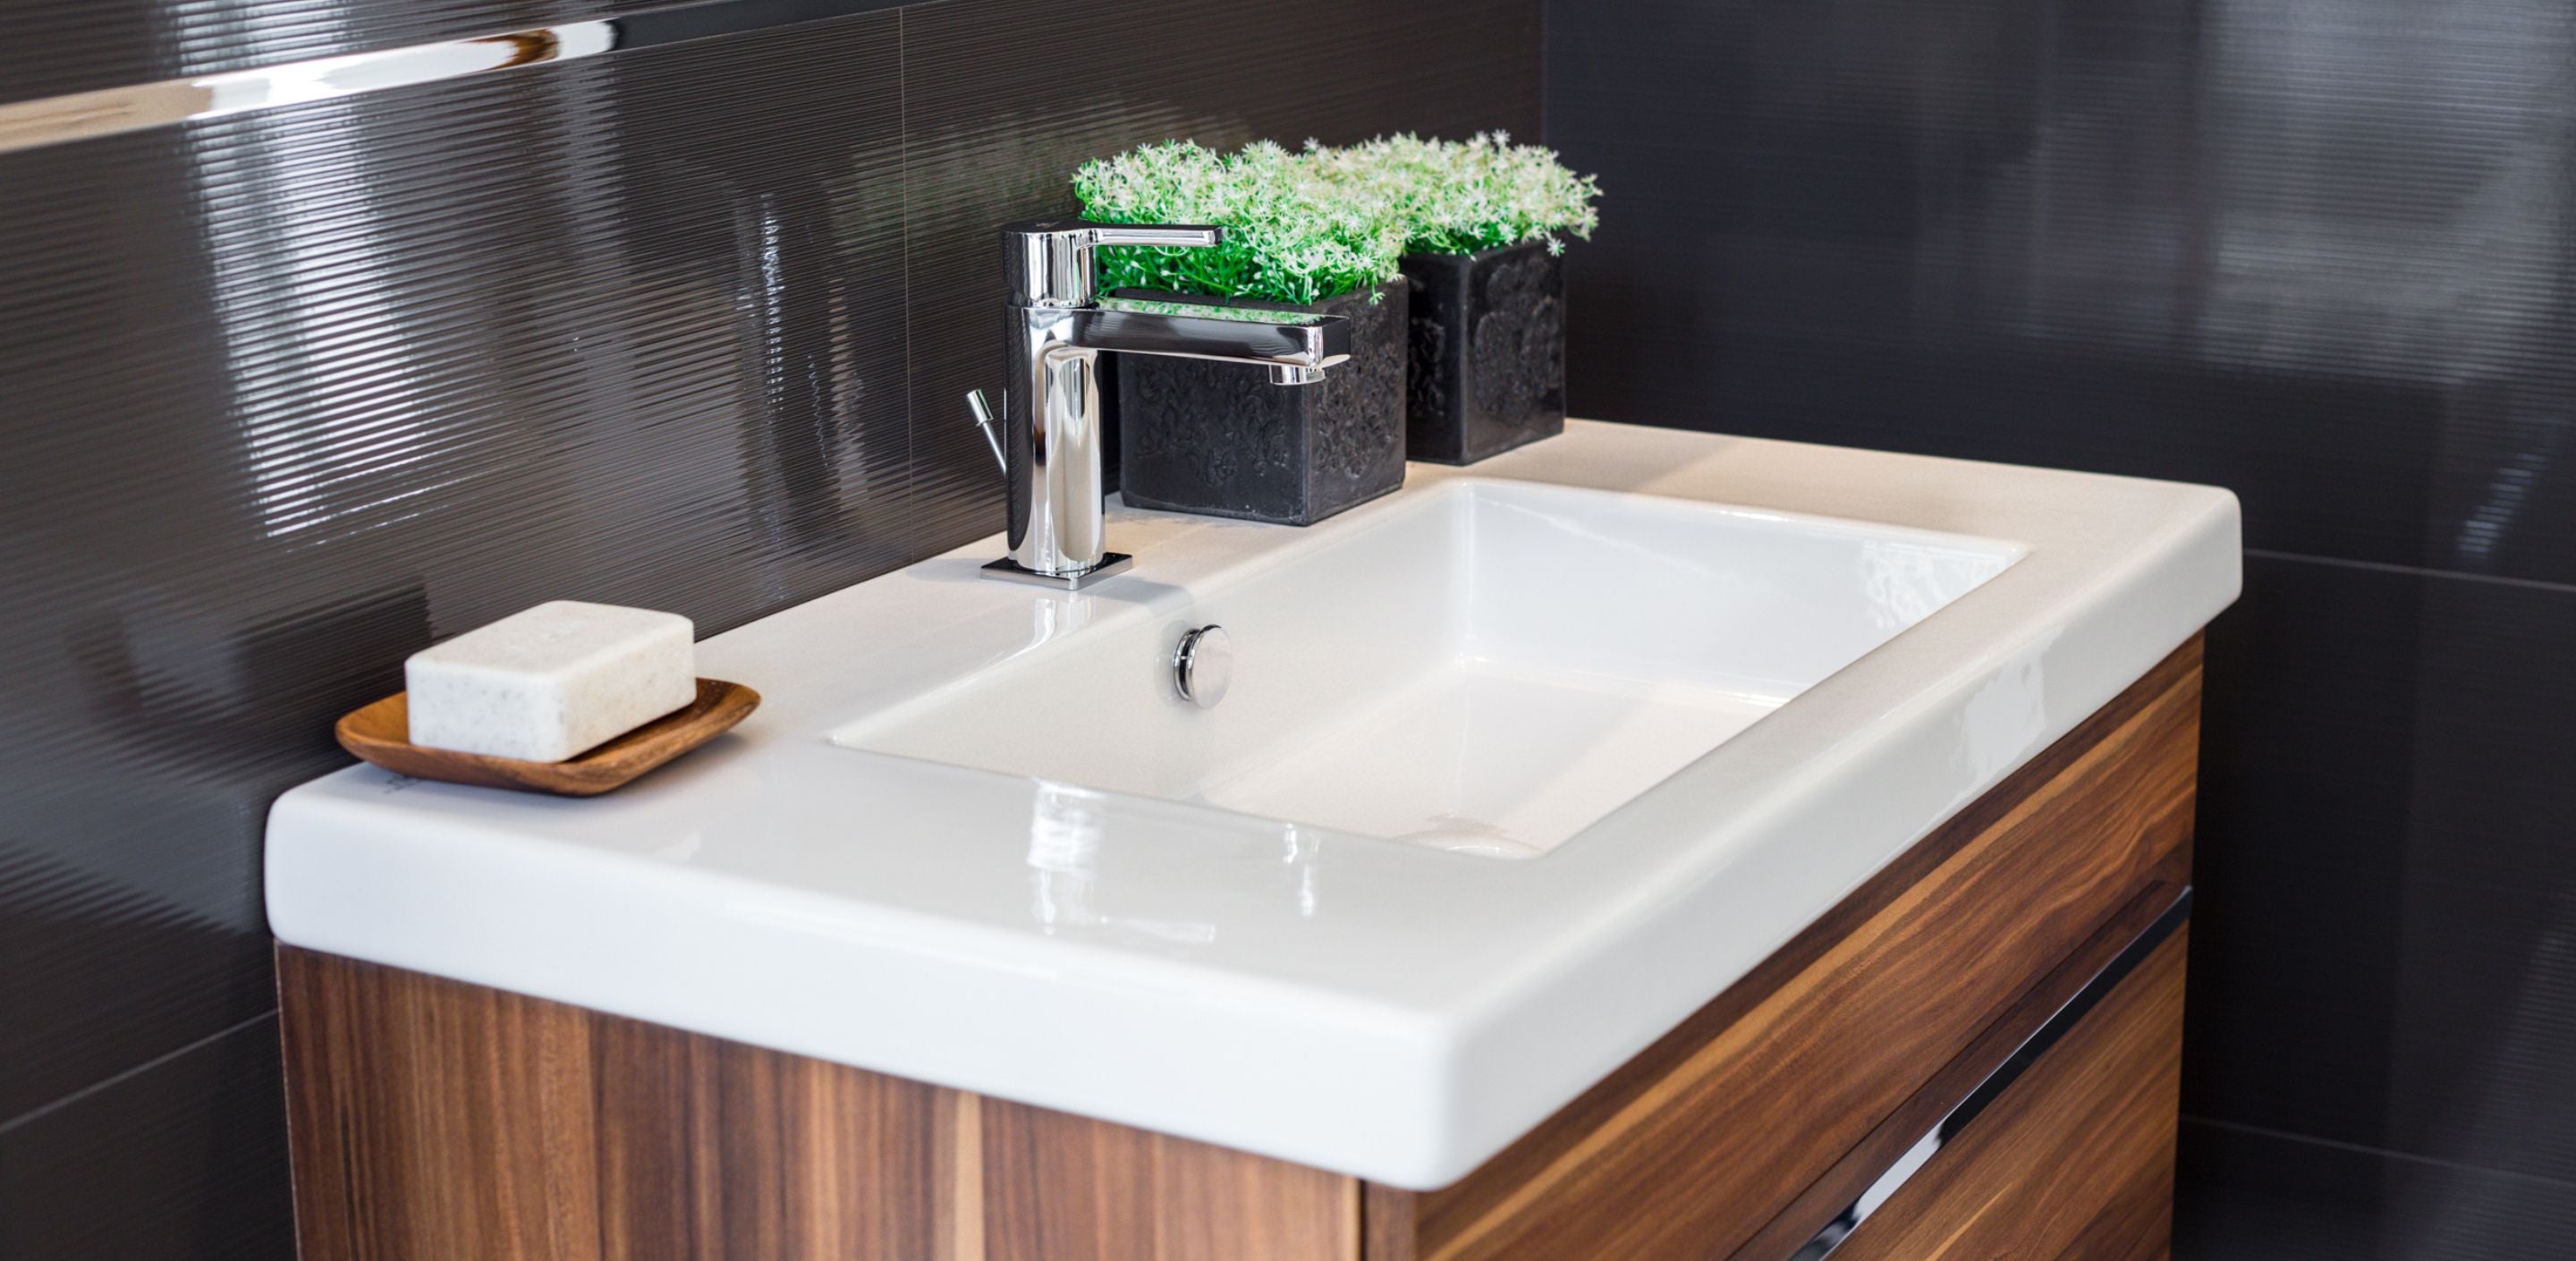 Choosing the right vanity unit for your bathroom